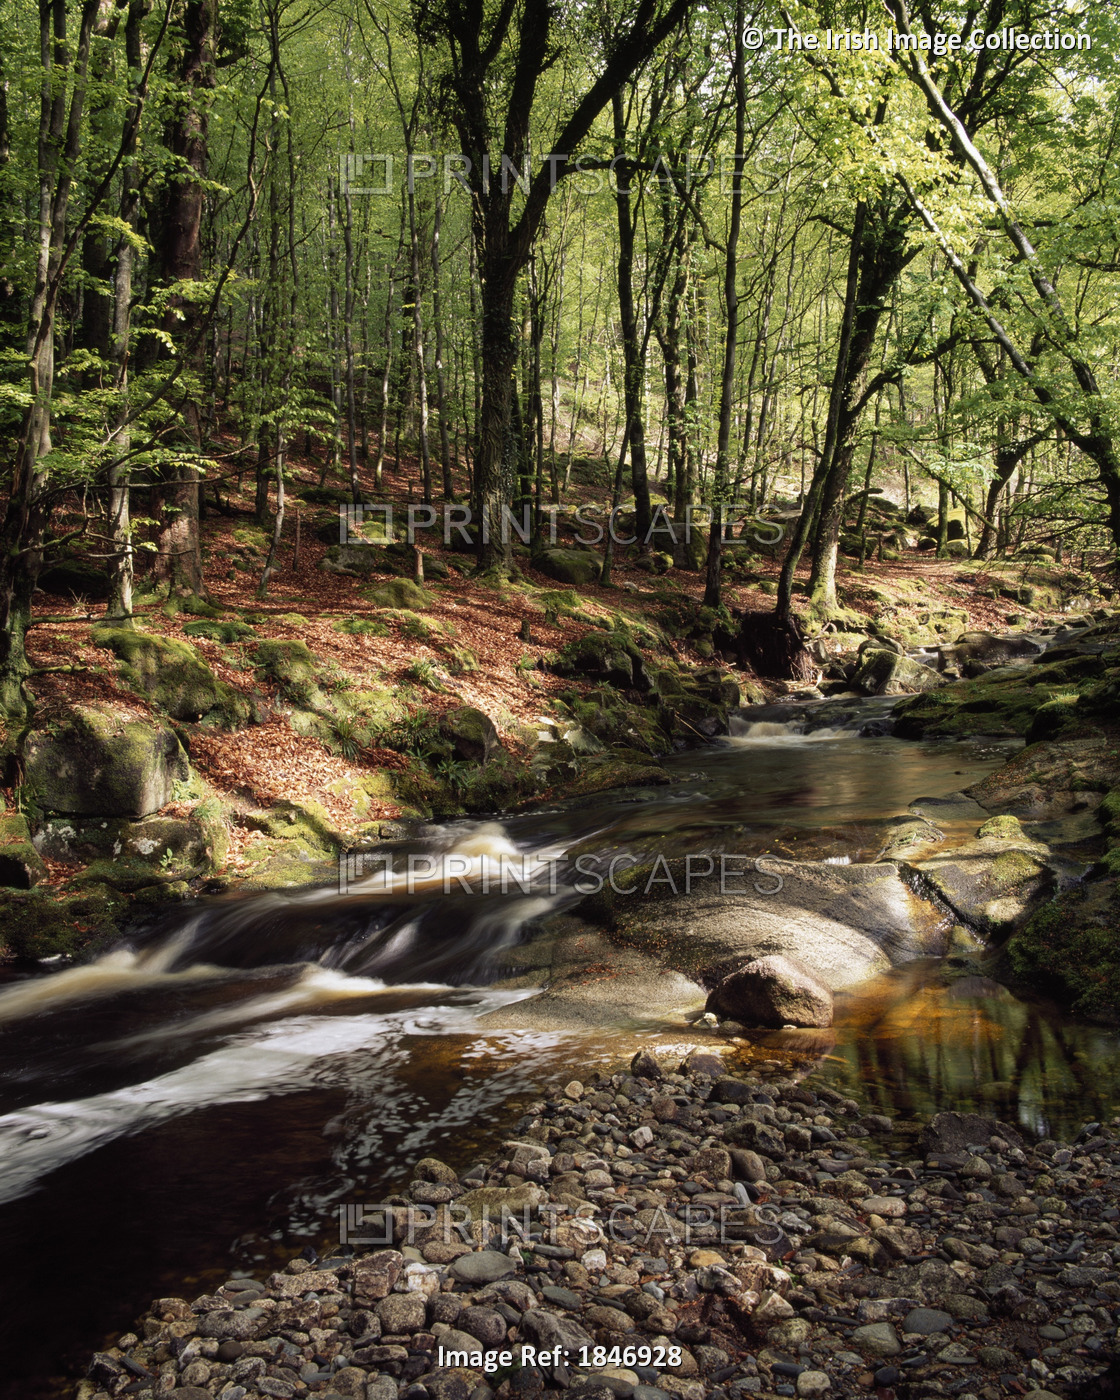 Creek In Woods, Cloughleagh, County Wicklow, Ireland